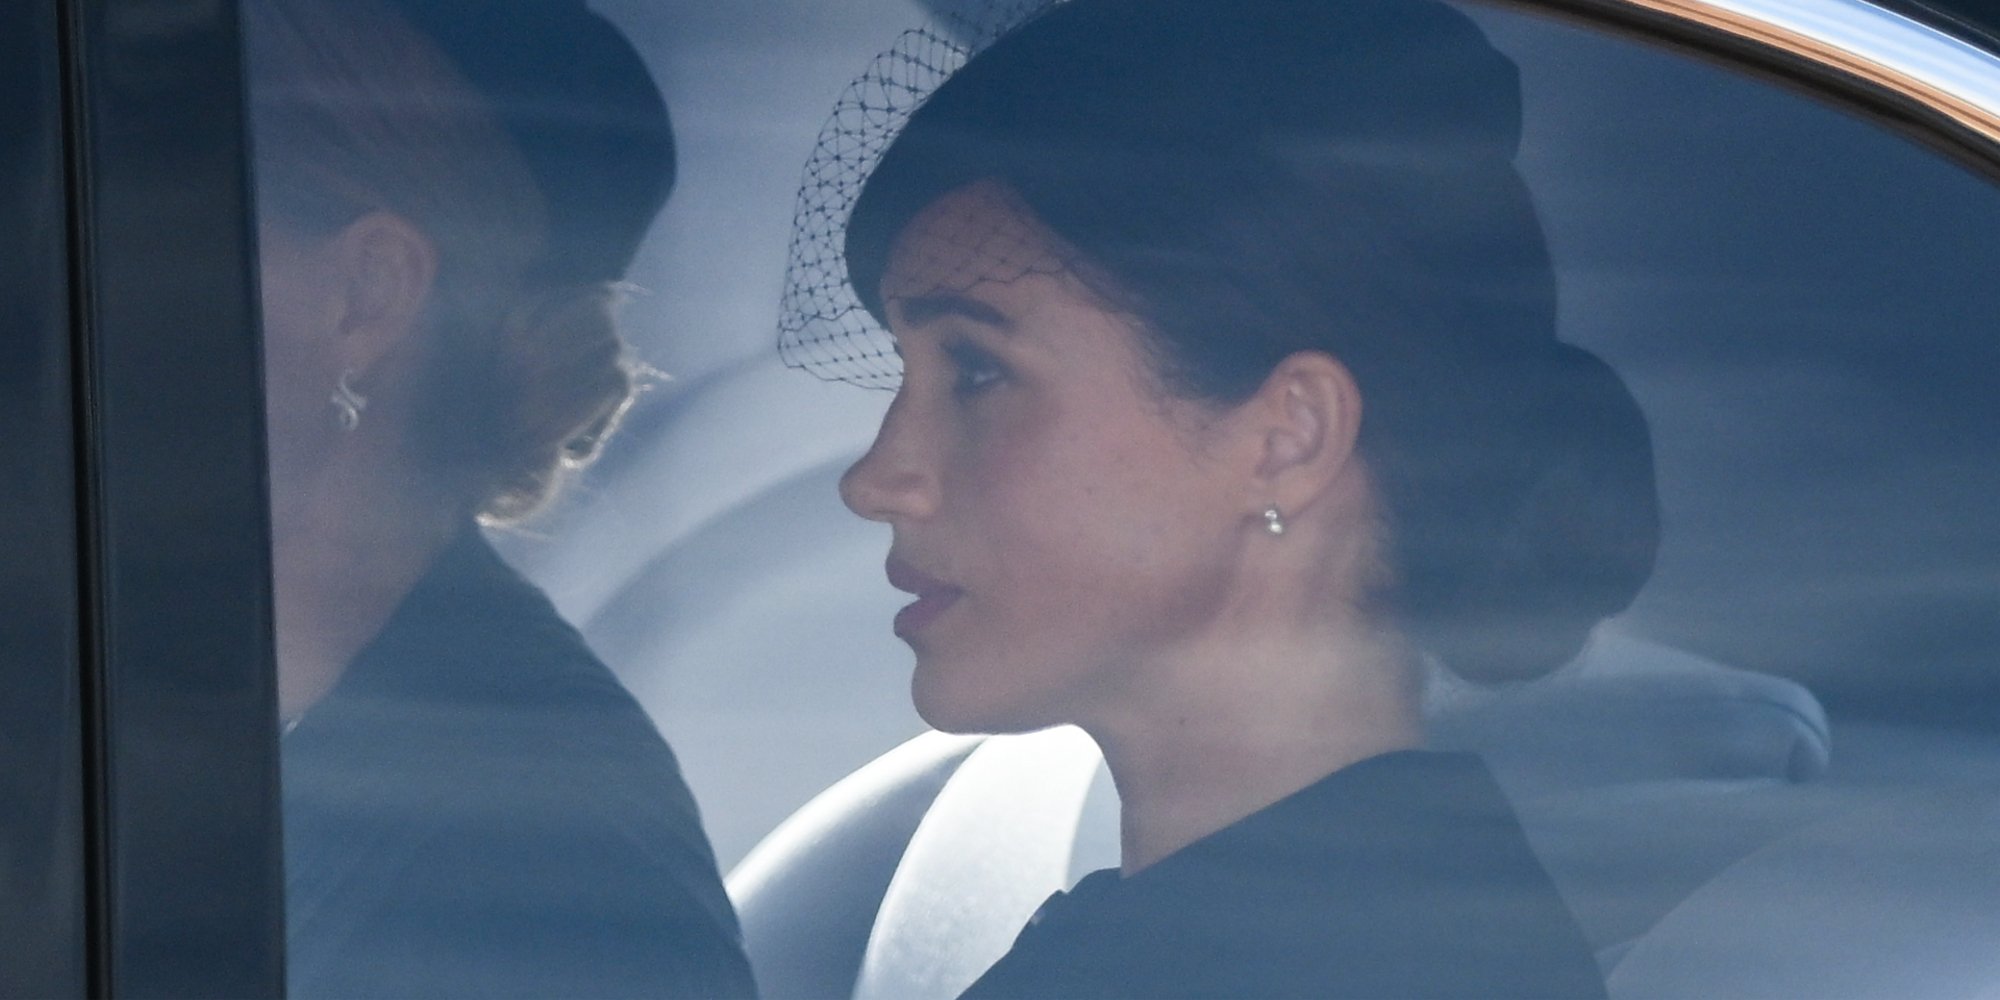 Meghan Markle arrives at Queen Elizabeth's lying in state service at Westminster Hall.